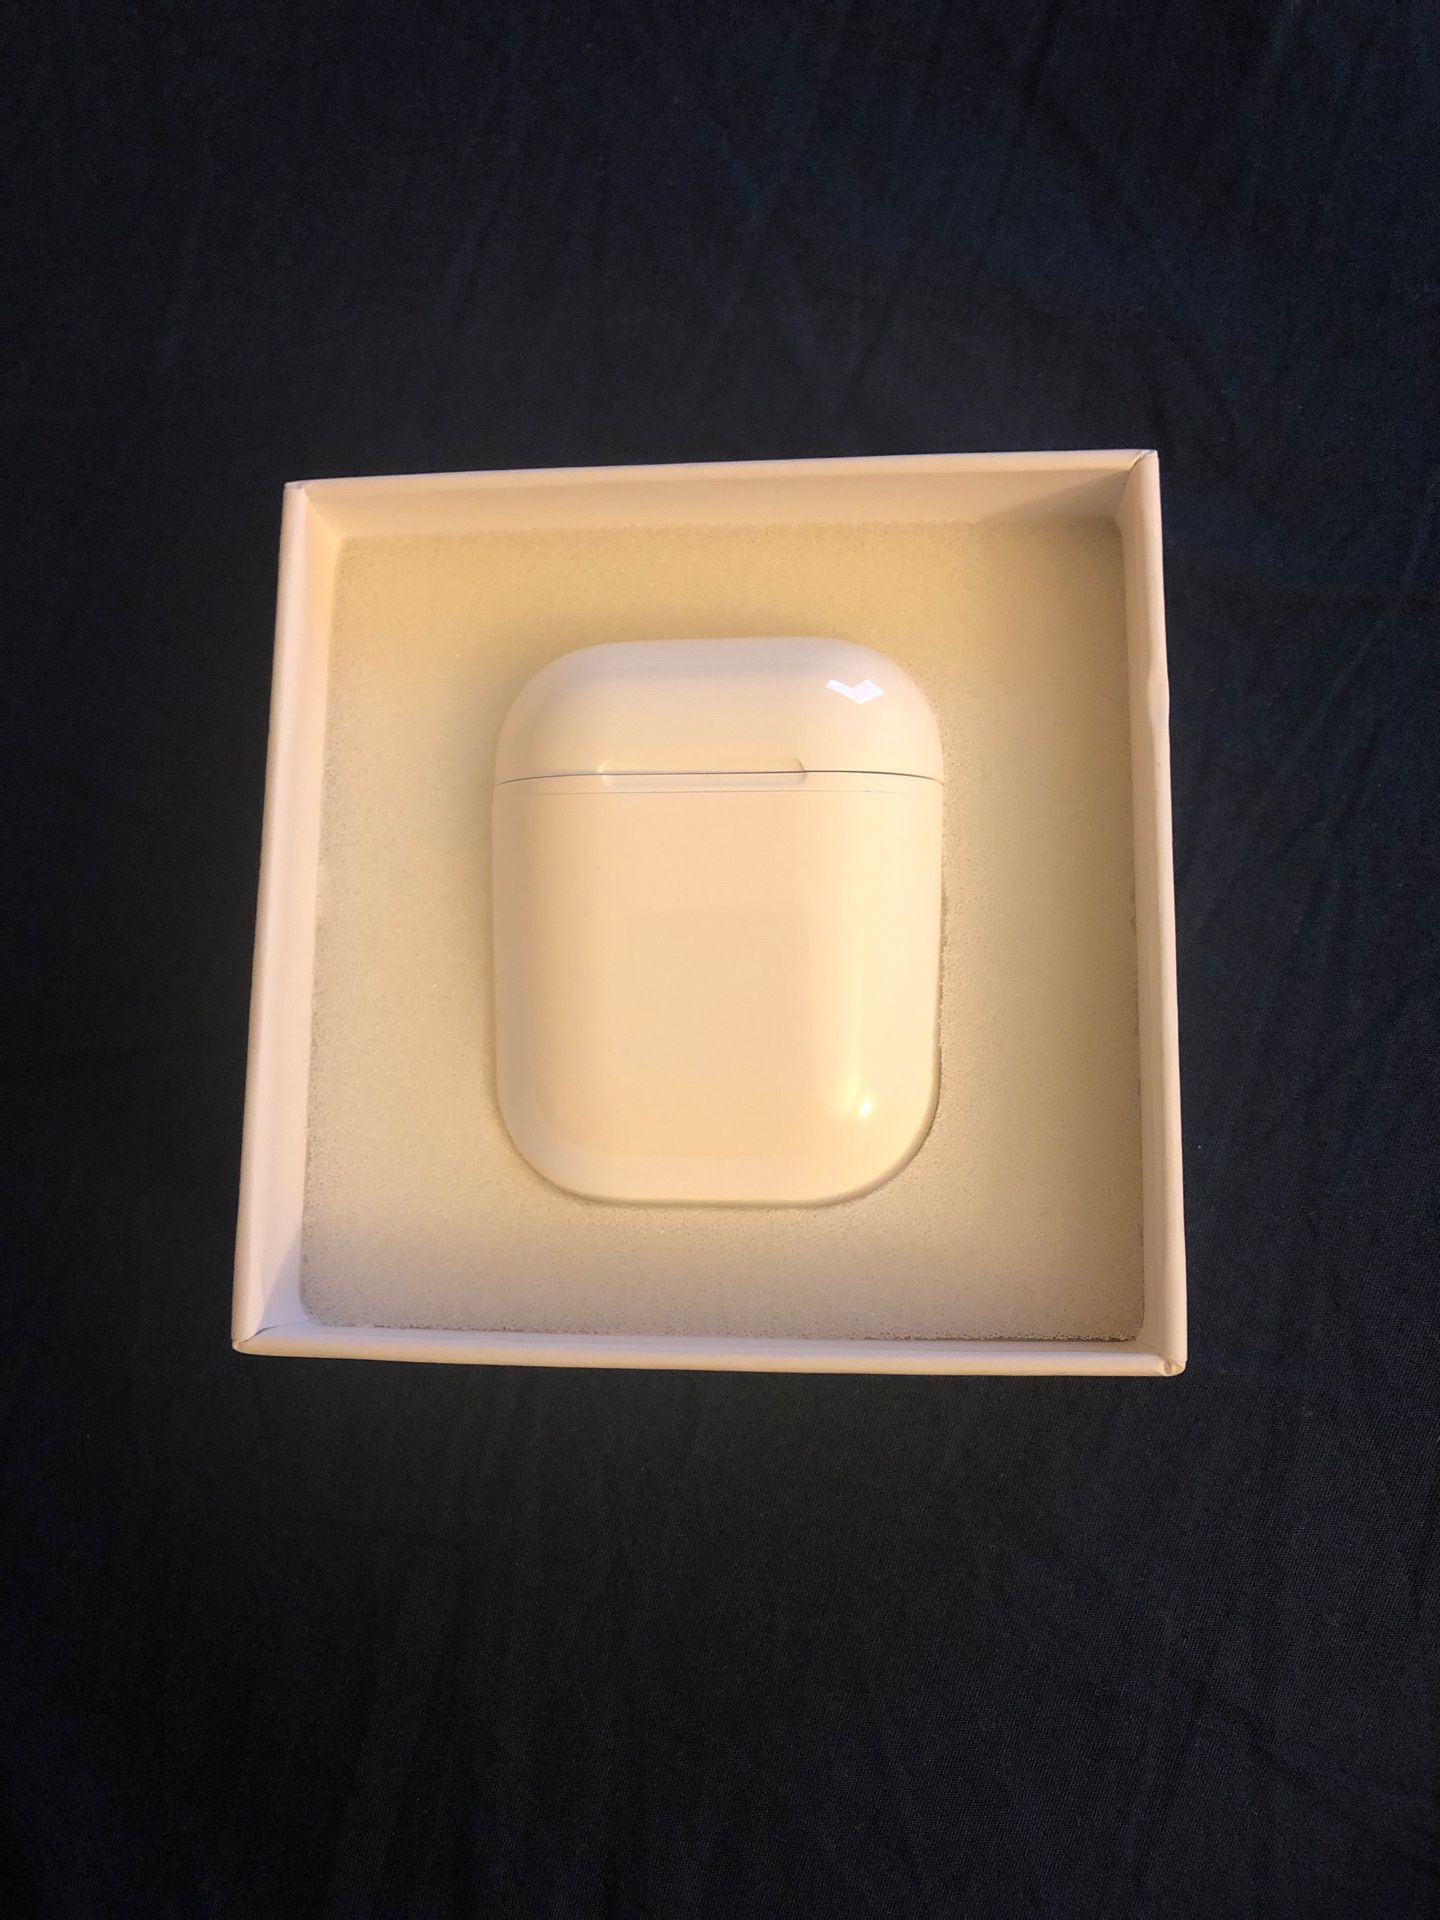 AirPods wireless charging case for gen 1